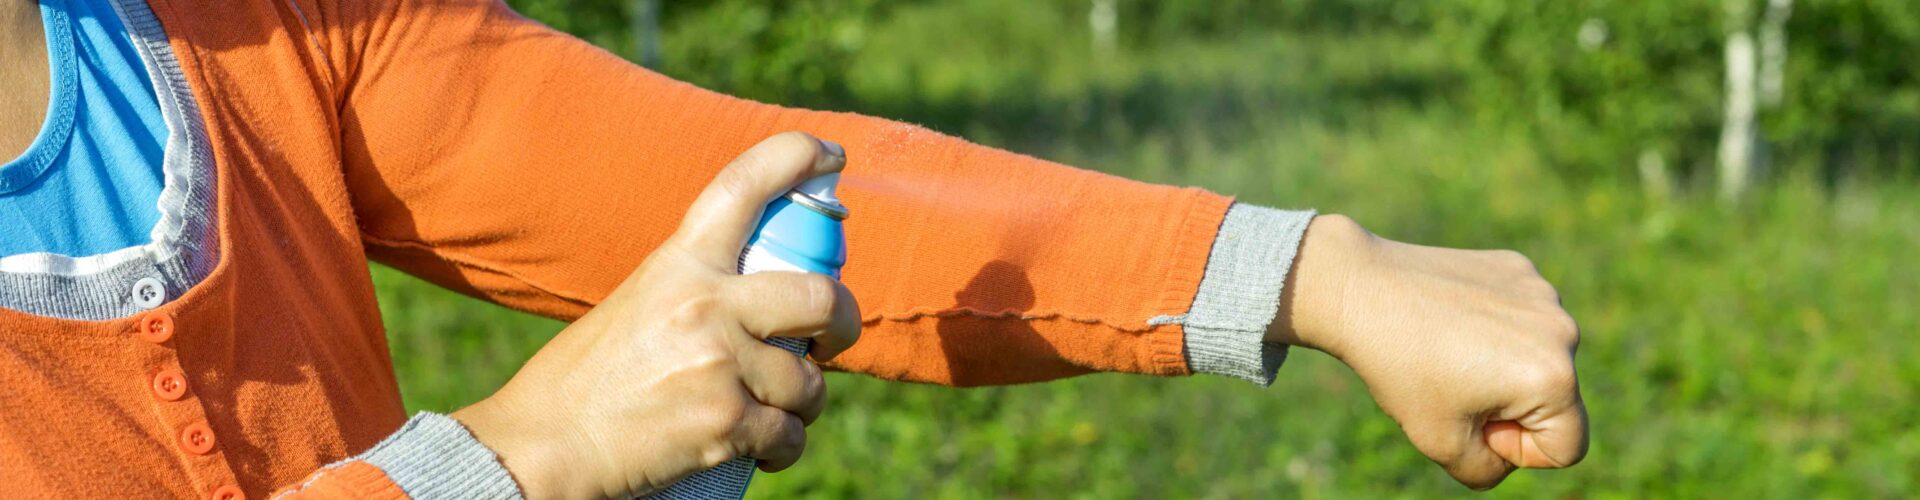 person applying insect repellent on long sleeves